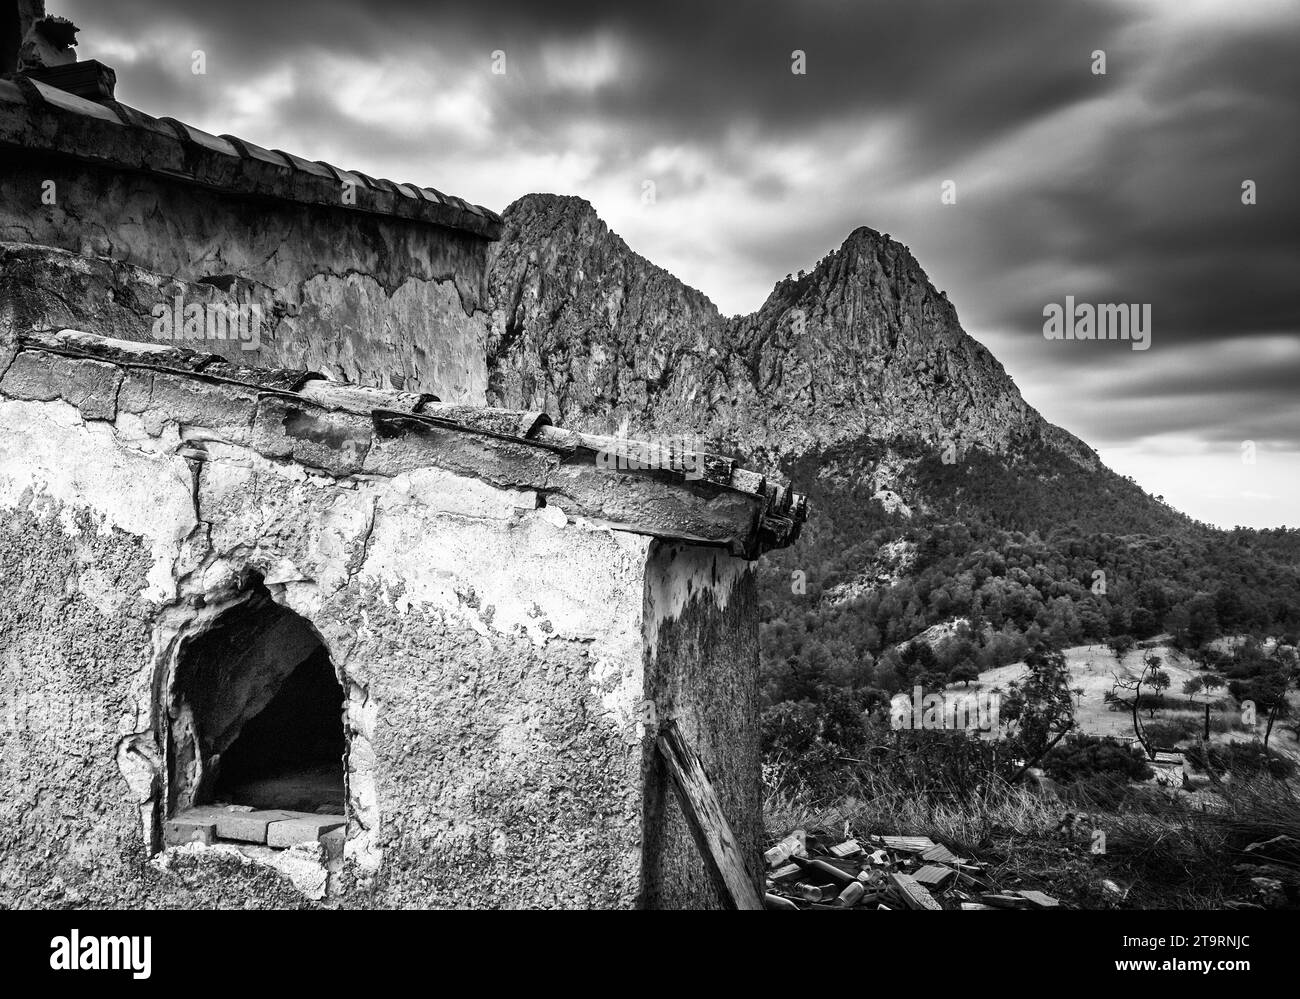 Oven from an abandoned house in Sella Stock Photo - Alamy